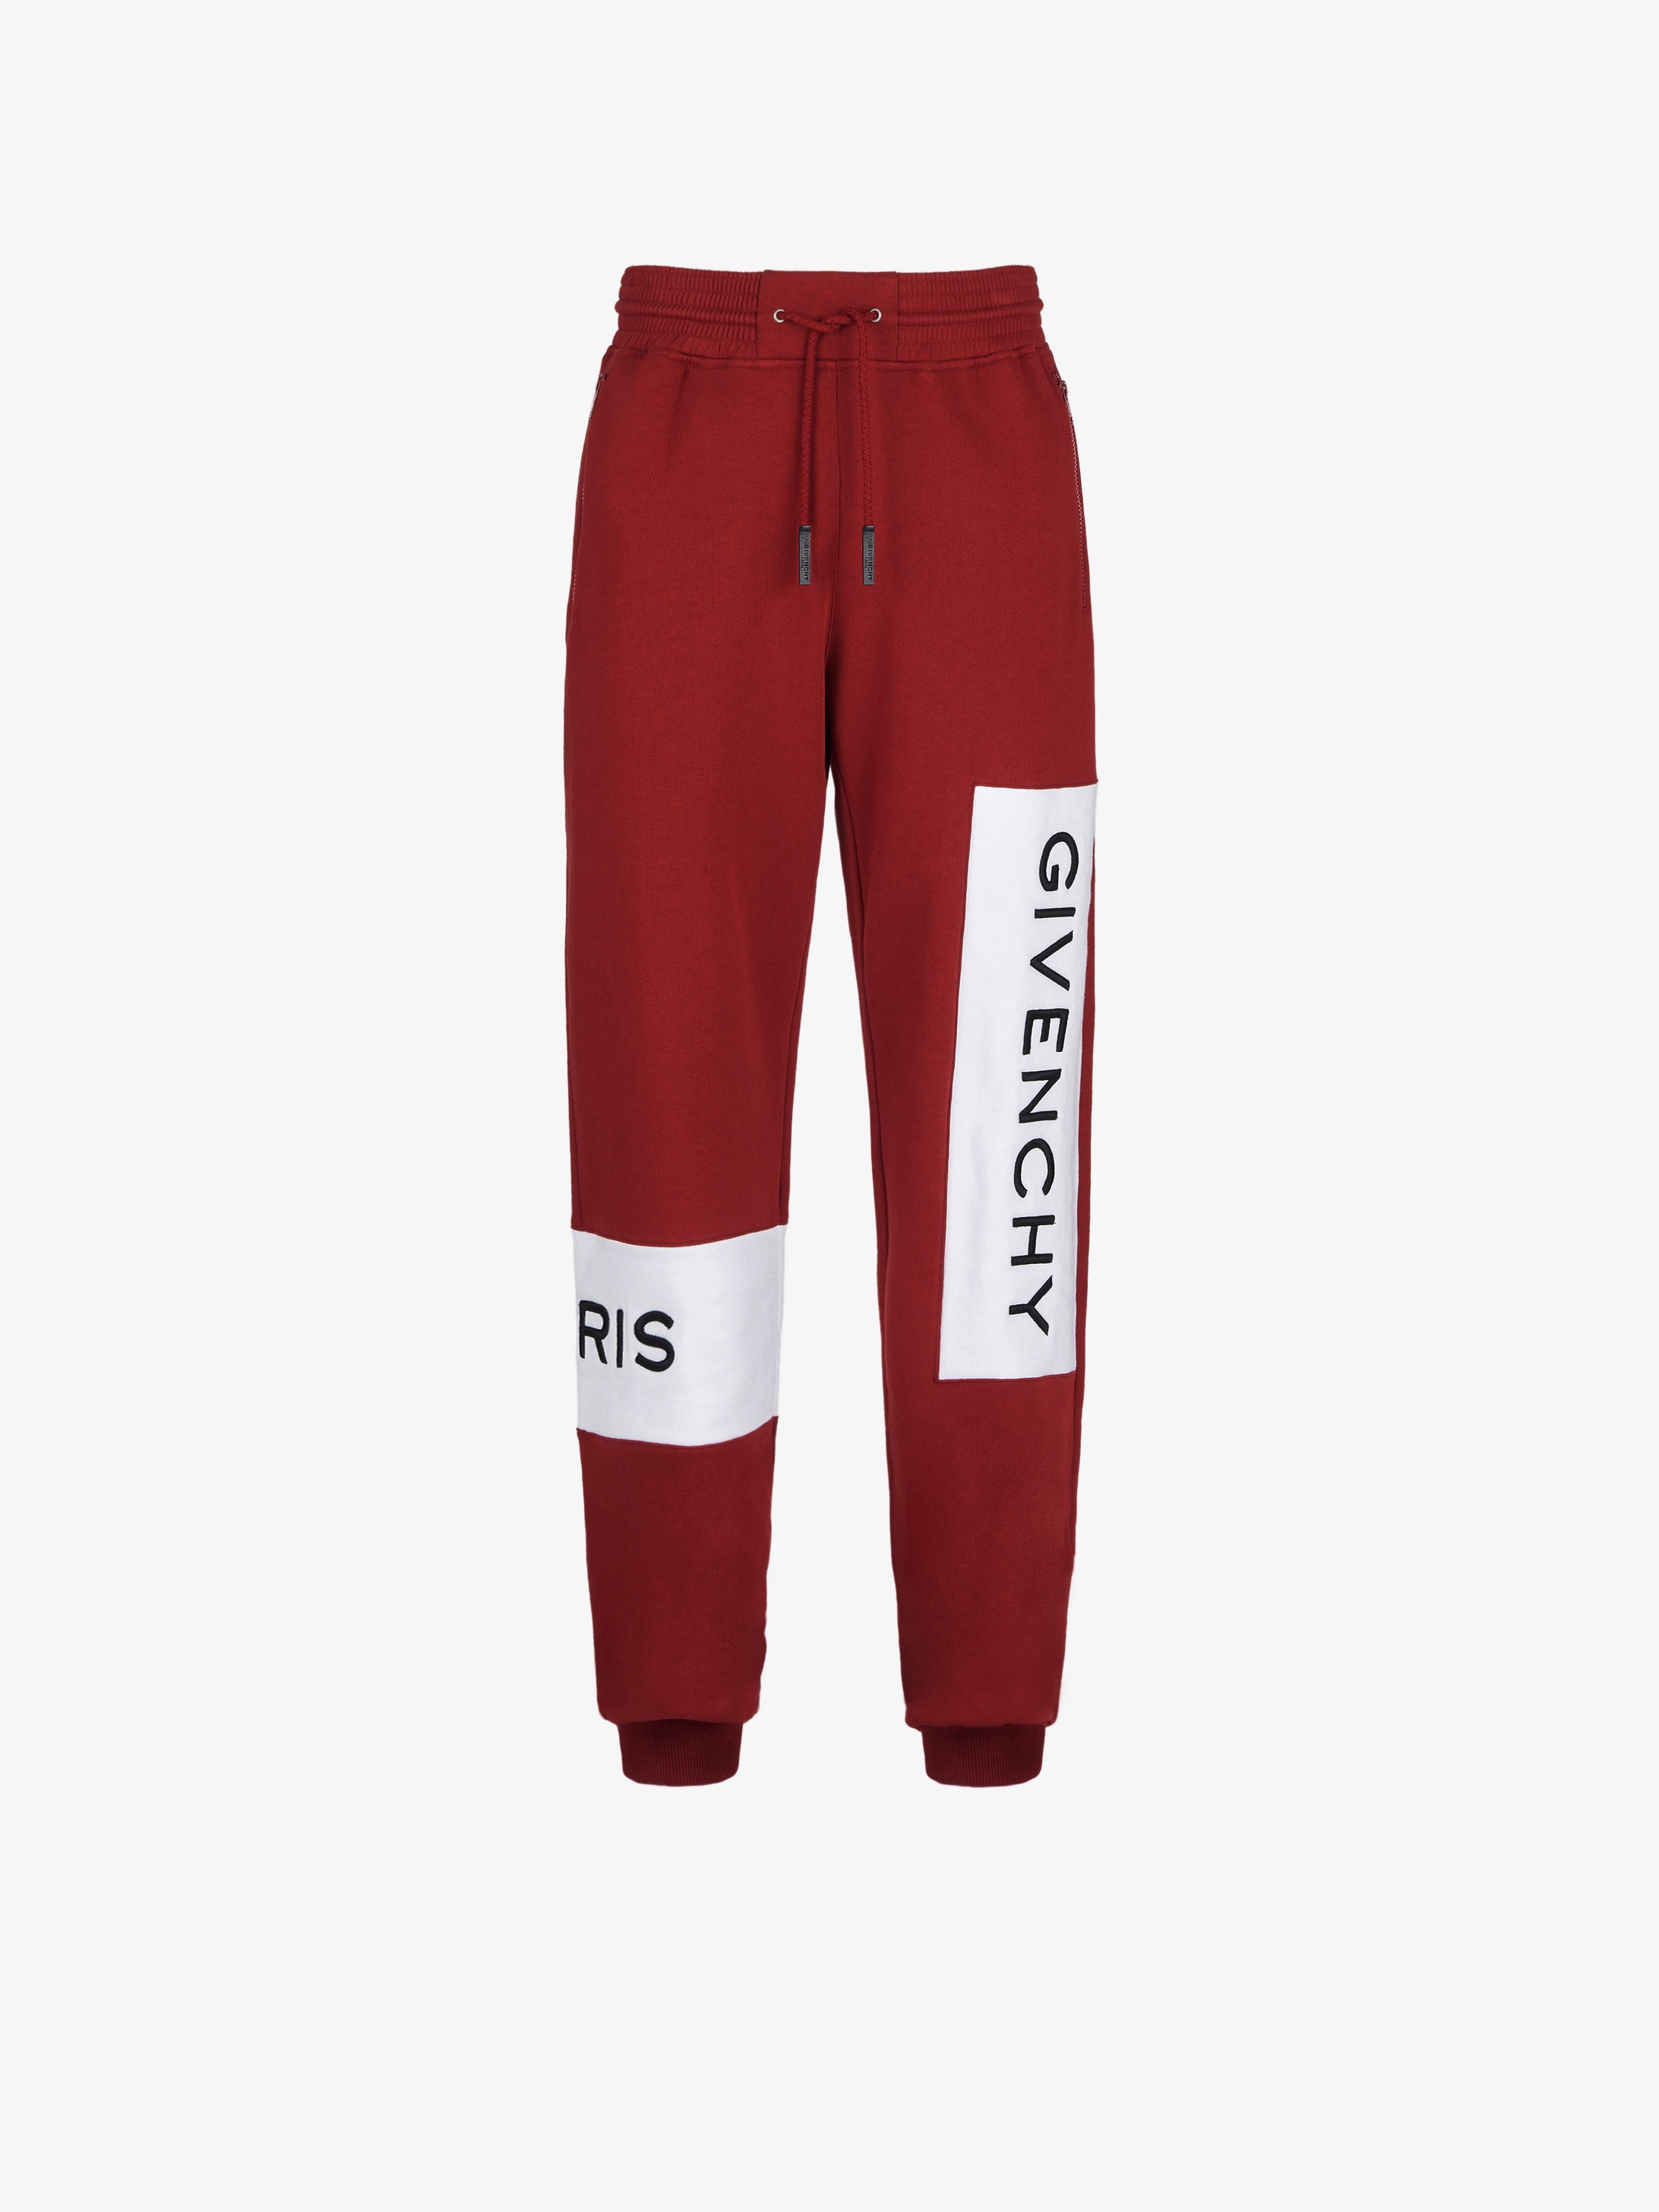 givenchy embroidered jogger pants